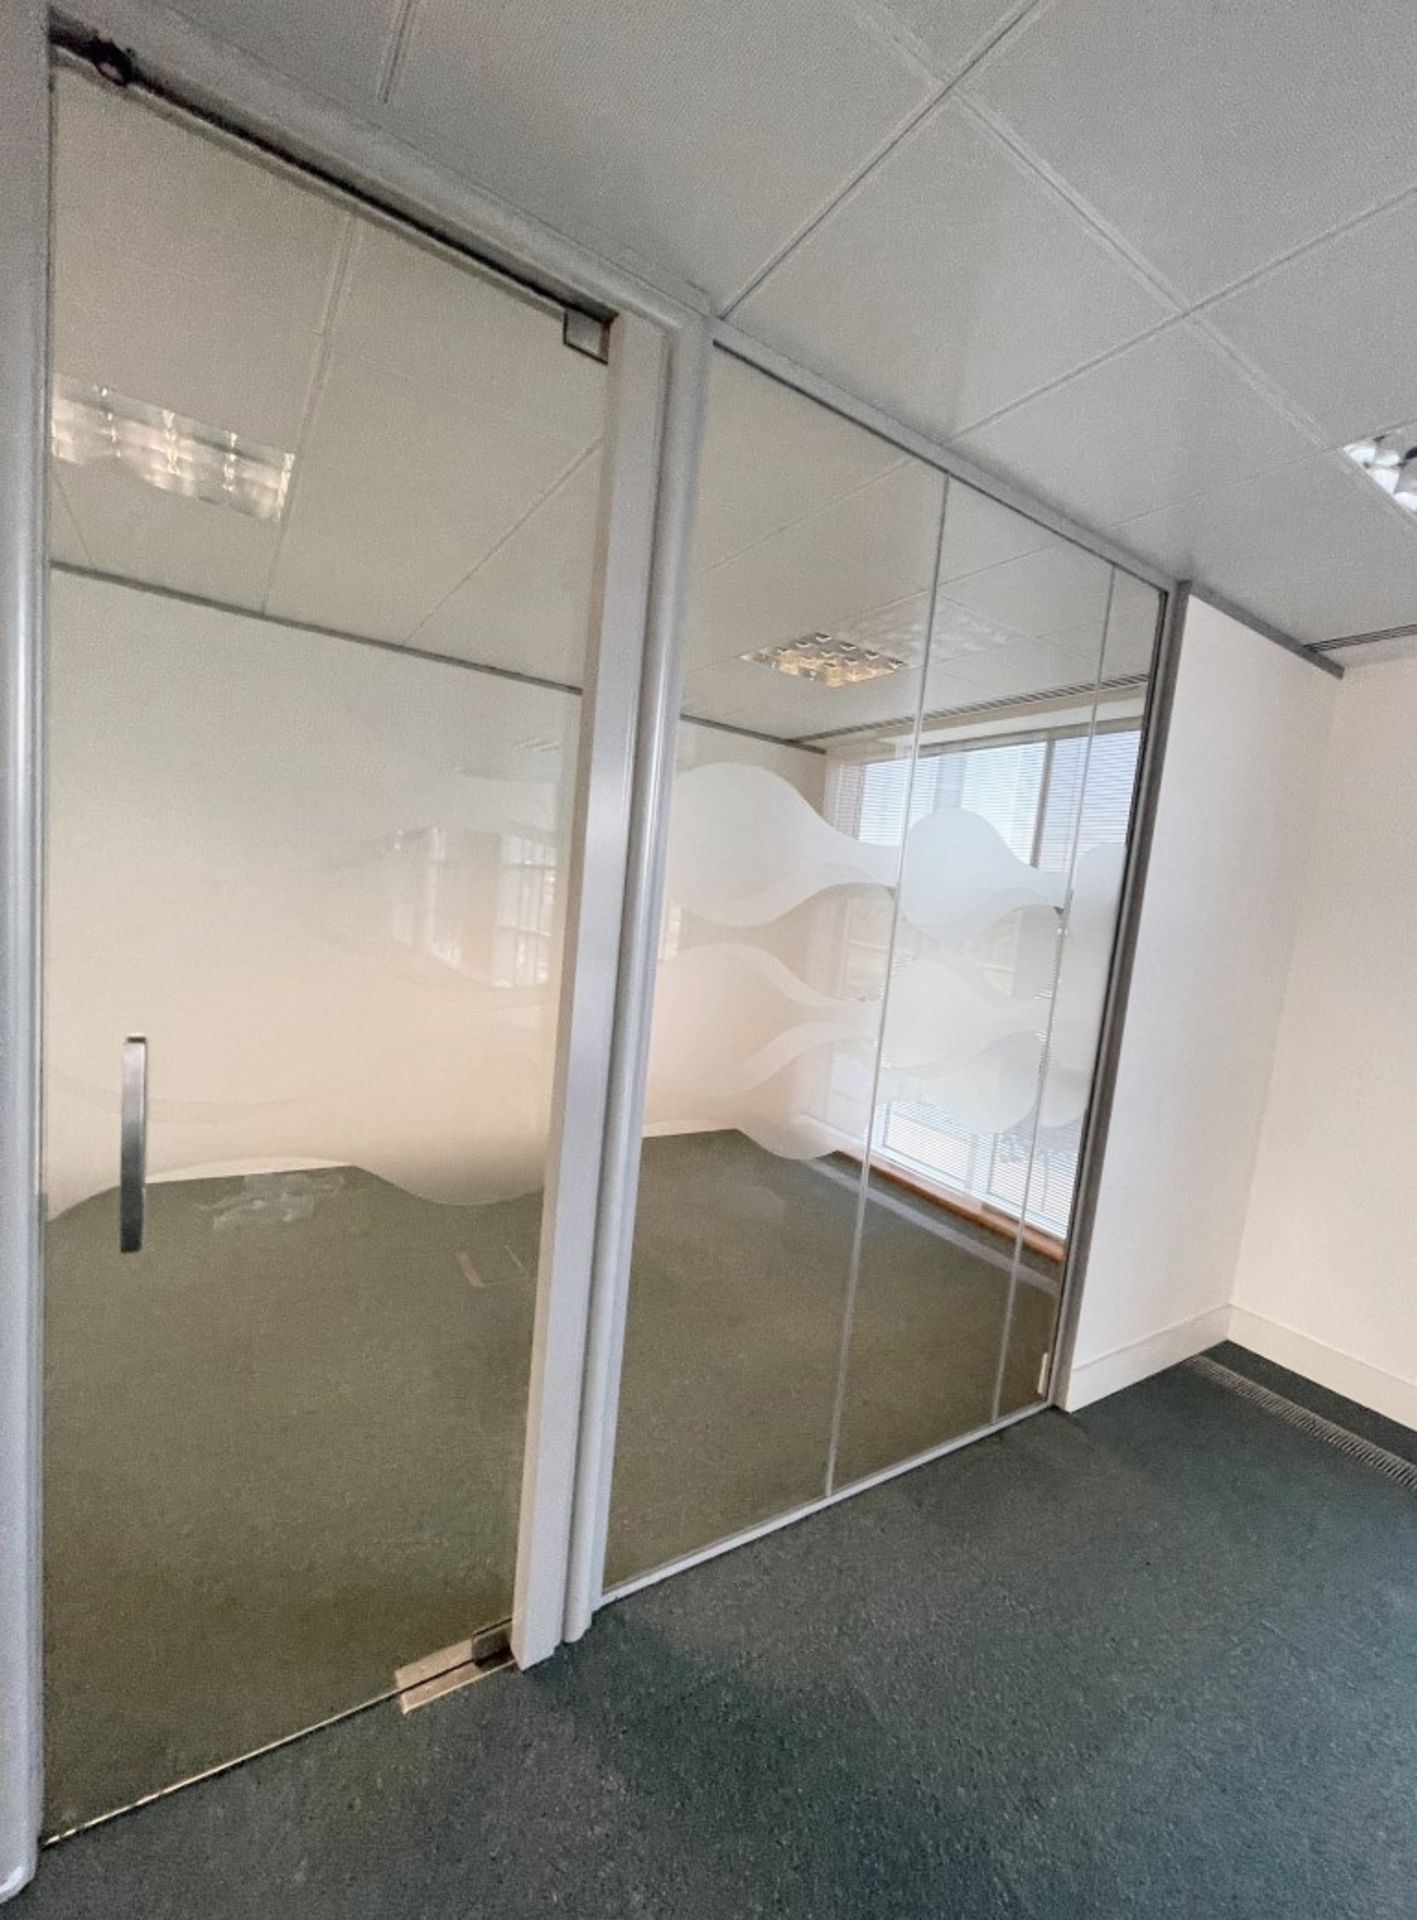 3 x Glass Room Partion Panels - Covers An Area Of 273cm Across - Ref: ED192/Watt - To Be Removed